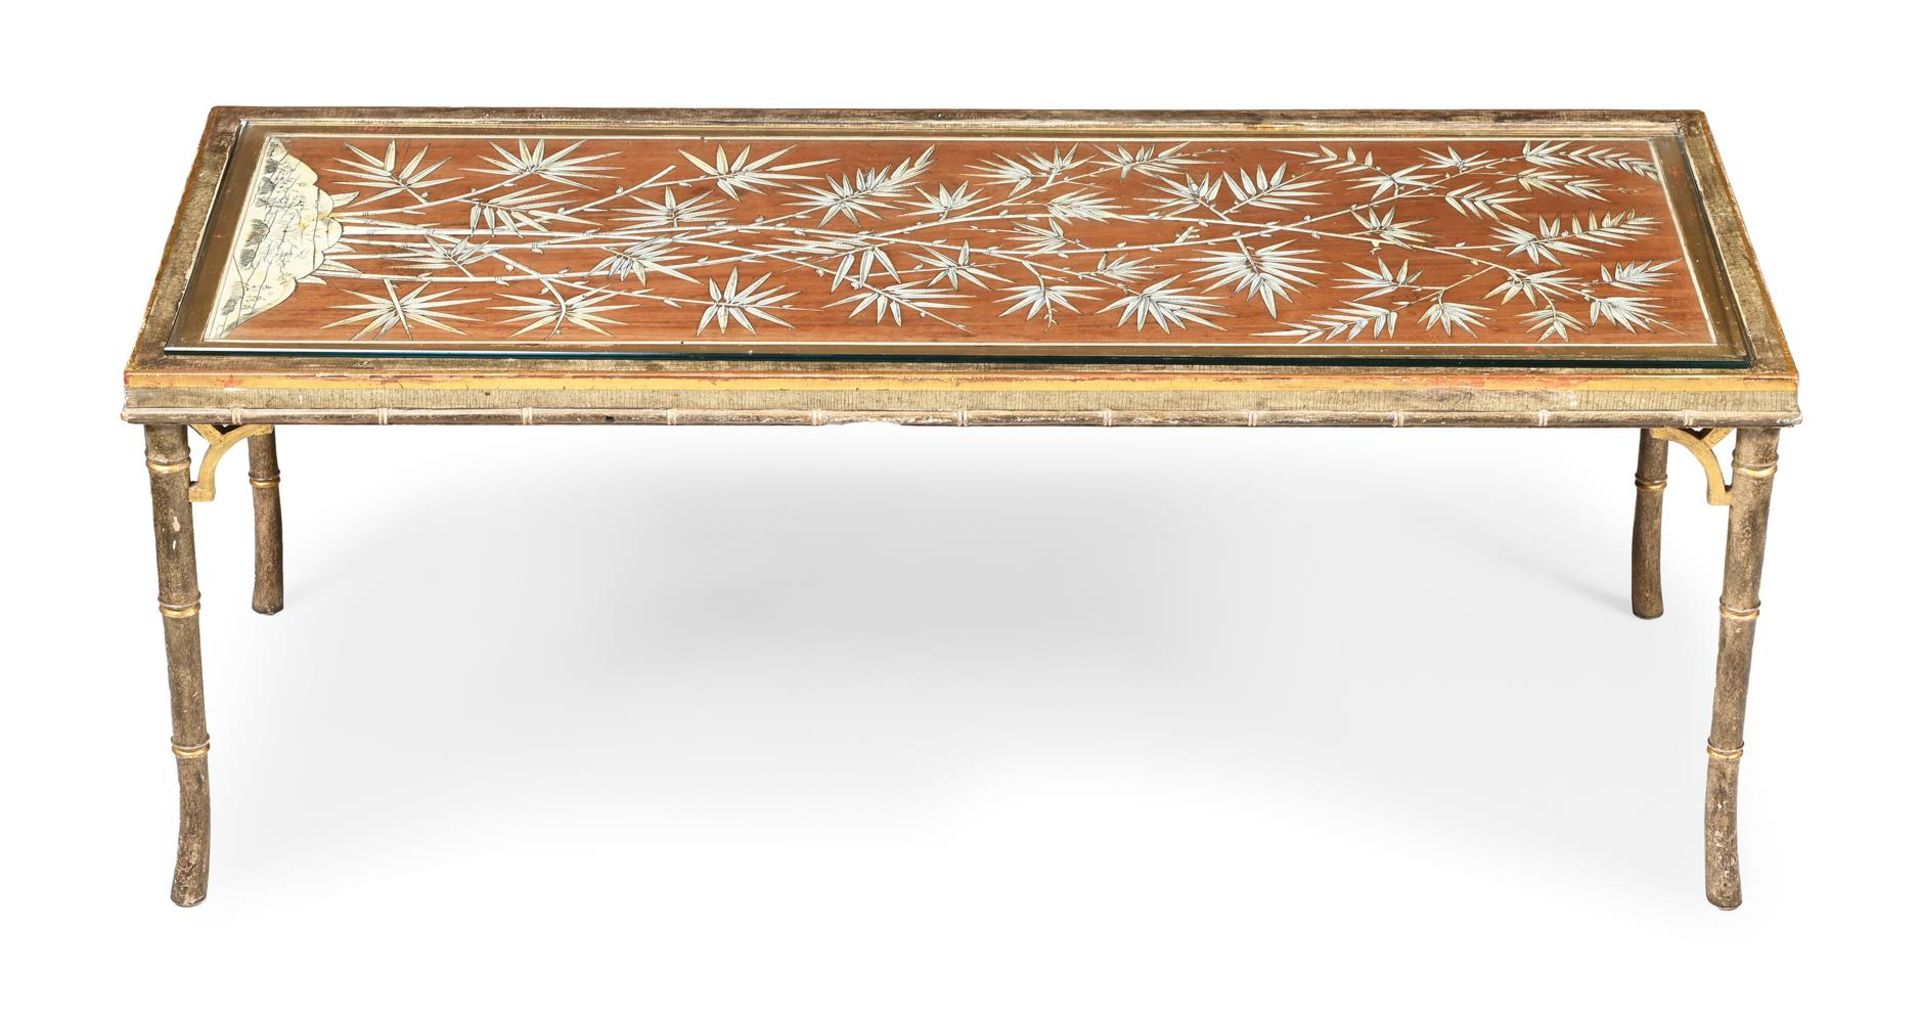 Y AN ANGLO-INDIAN ENGRAVED IVORY AND INDIAN ROSEWOOD PANEL, THE PANEL VIZAGAPATAM, CIRCA 1760 - Image 2 of 4